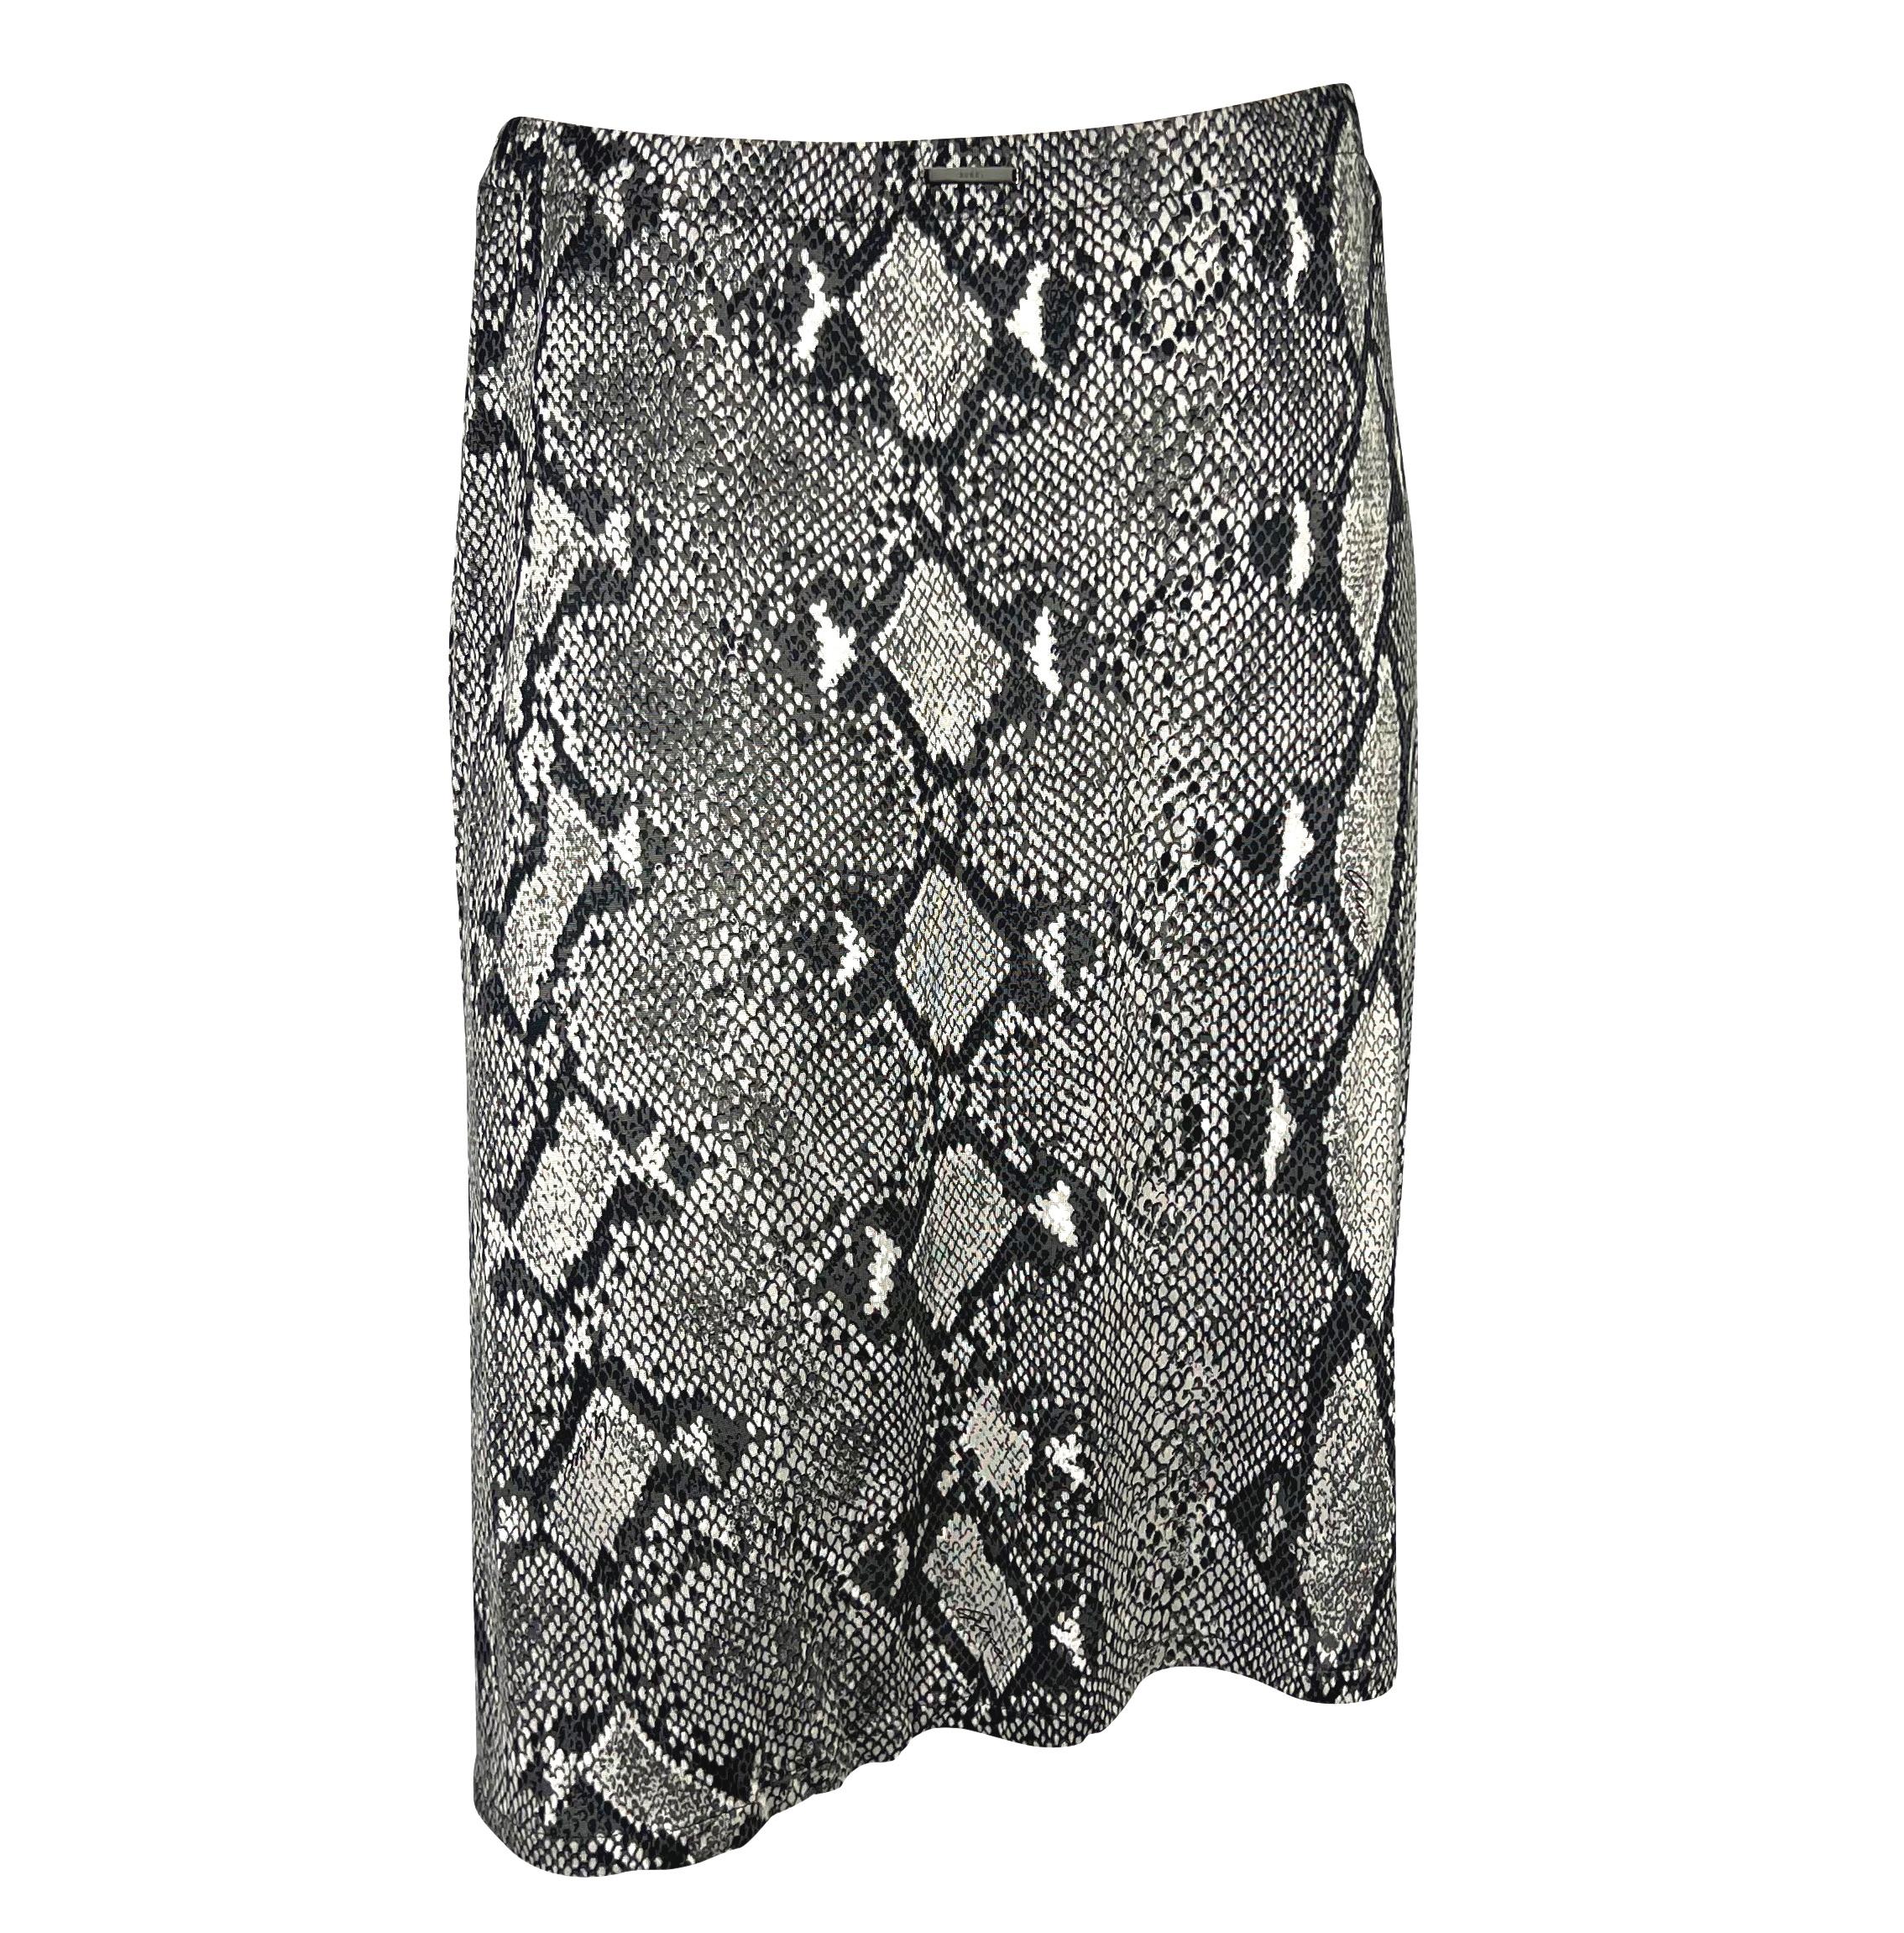 Presenting an incredible grey snakeskin Gucci skirt set, designed by Tom Ford. From the Spring/Summer 2000 collection, this snakeskin print was heavily used in Ford's collection. This set consists of a viscose t-shirt and a matching skirt. The shirt